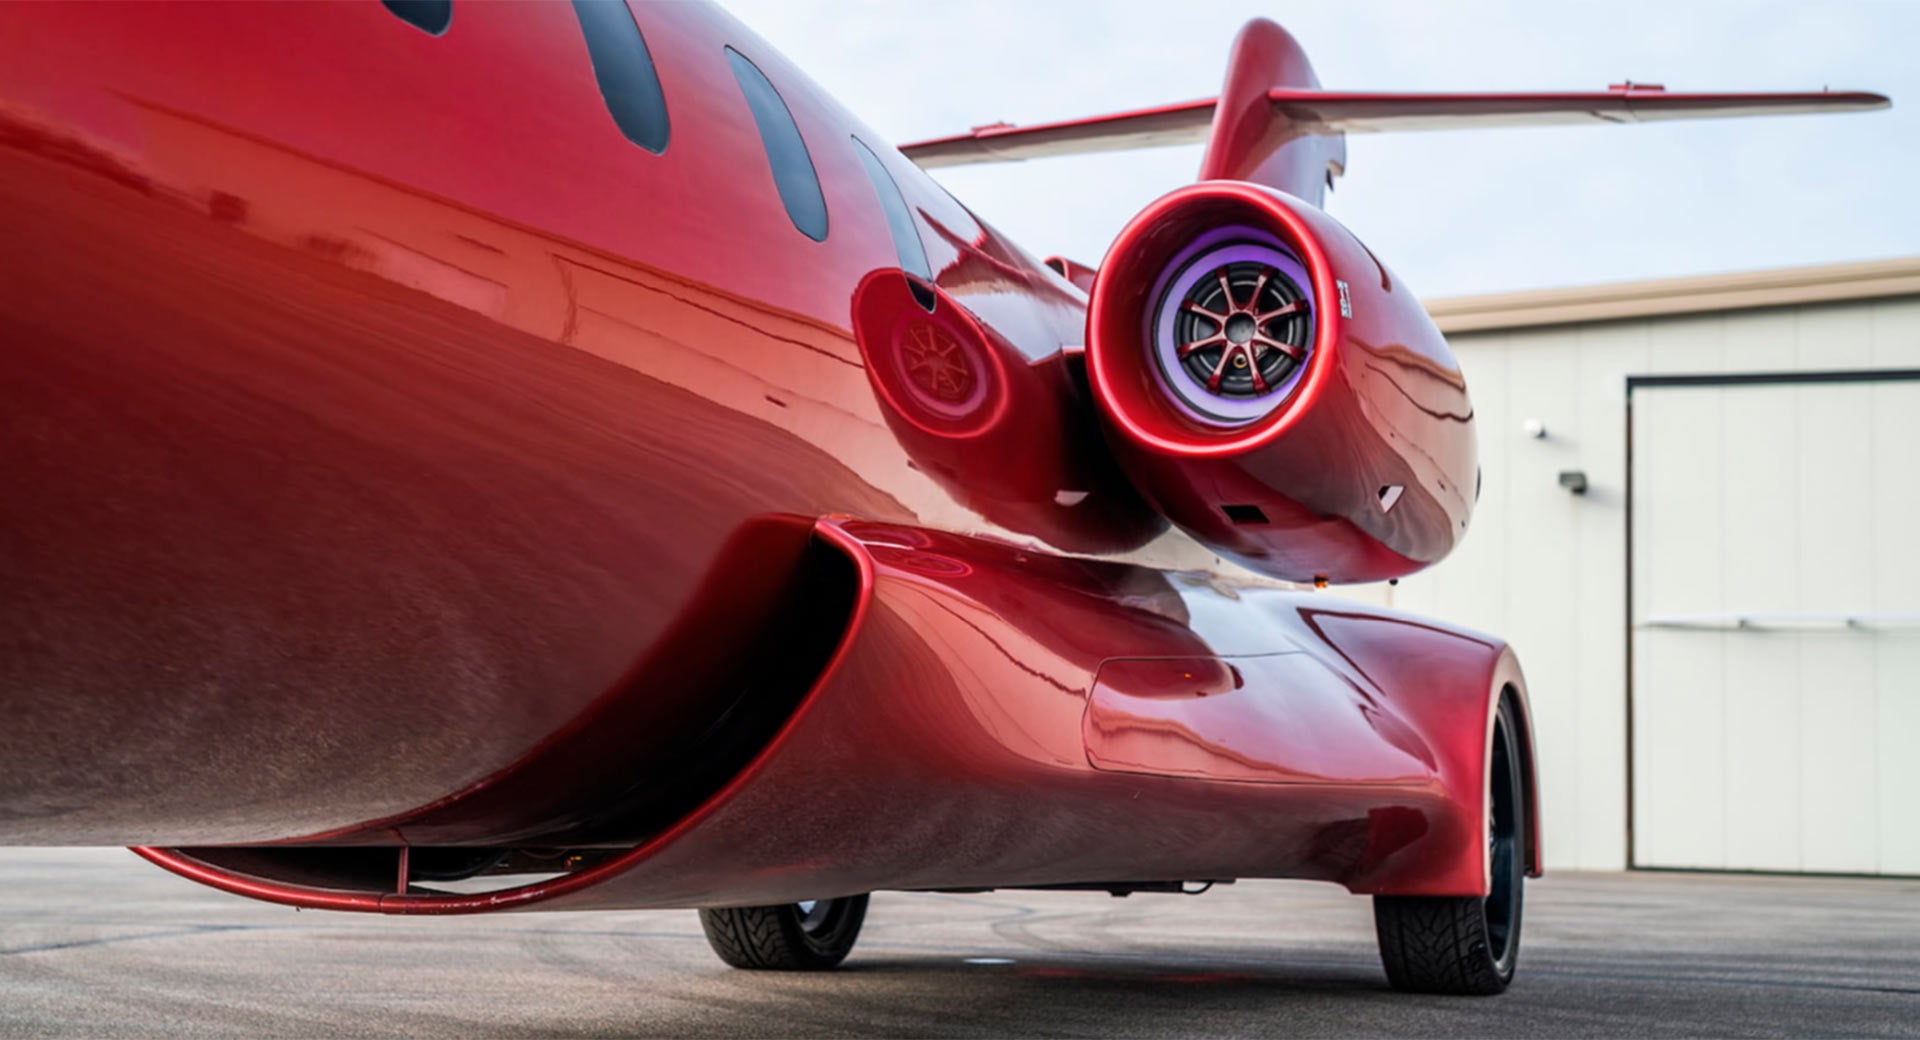 A Mitsubishi Dealership Is Selling A Ridiculous Learjet Limo